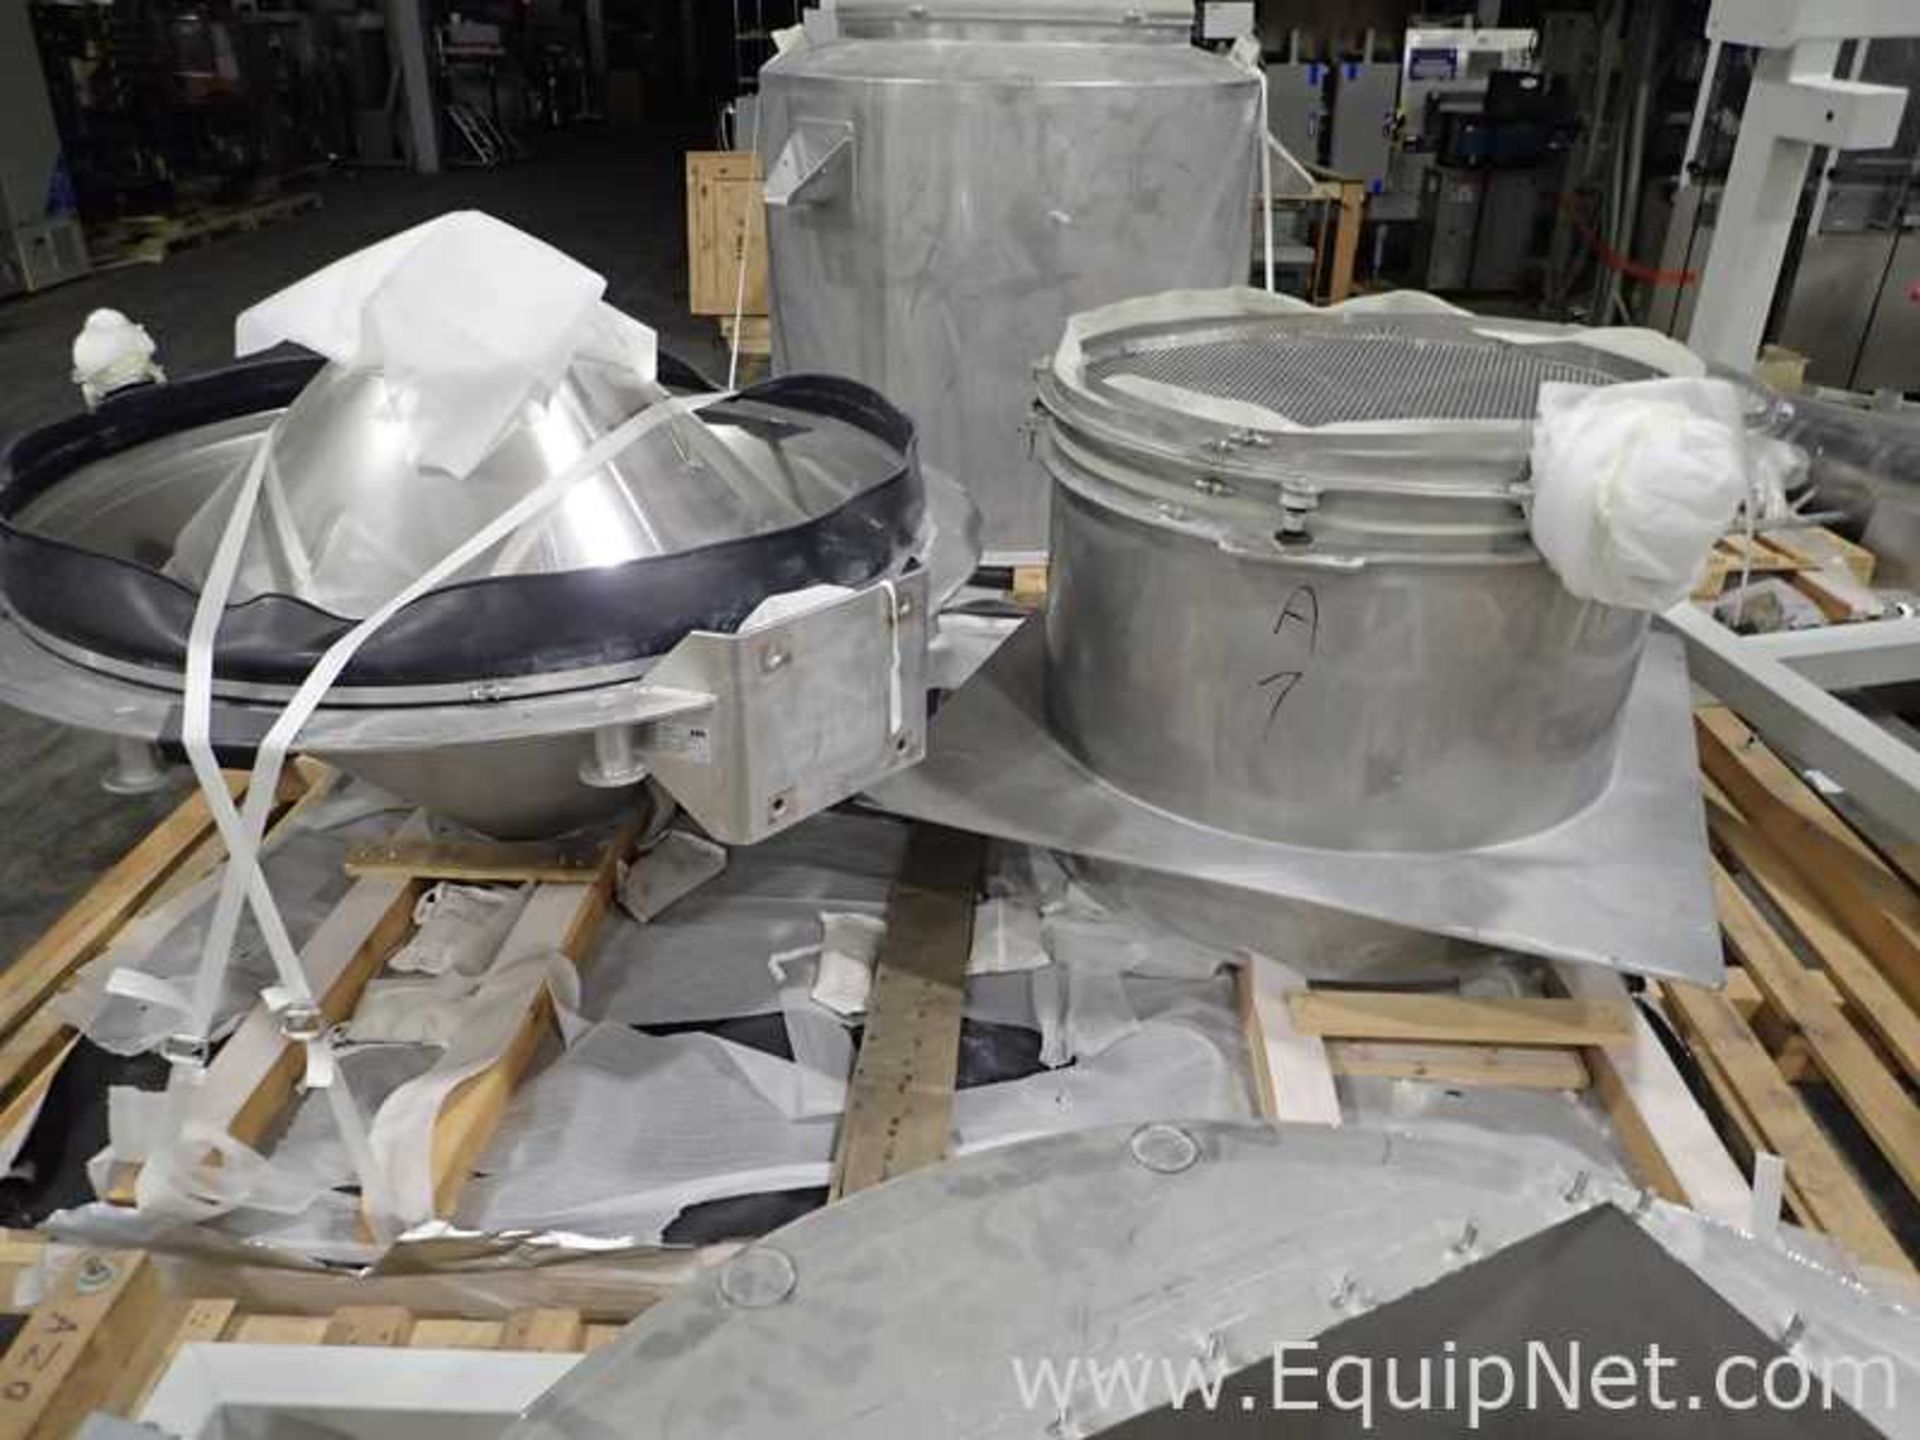 AZO Raw Material Production Equipment - Image 16 of 21